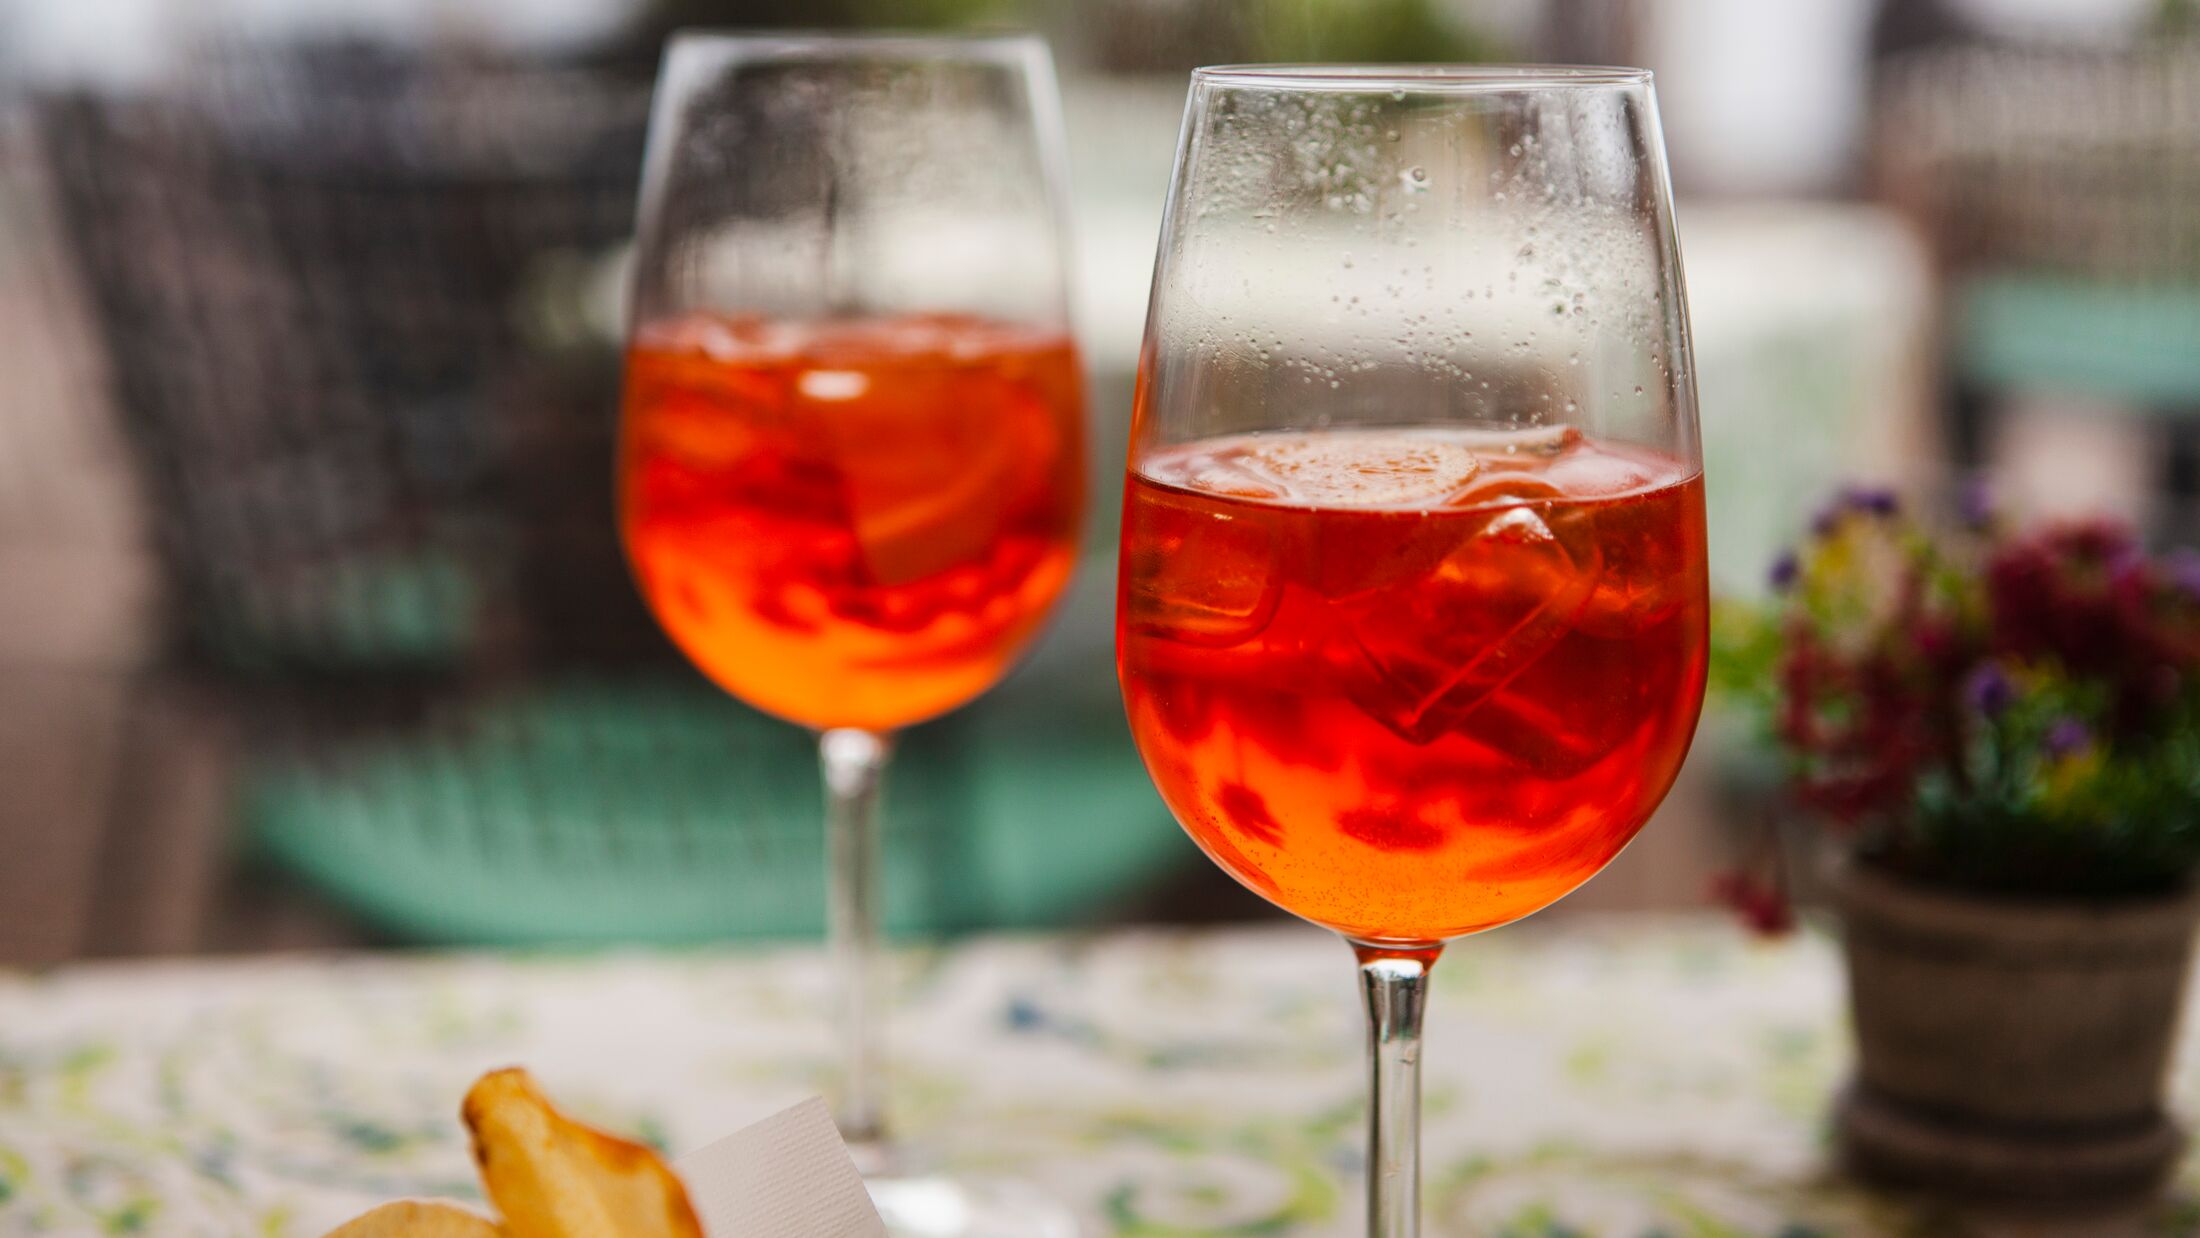 Italian traditional food and aperitif in the northern Italy, Lombardy, Milan. Two glasses of an alcoholic cocktail "Aperol spritz" with ice and snacks (potato chips) in an European cafe (restaurant).